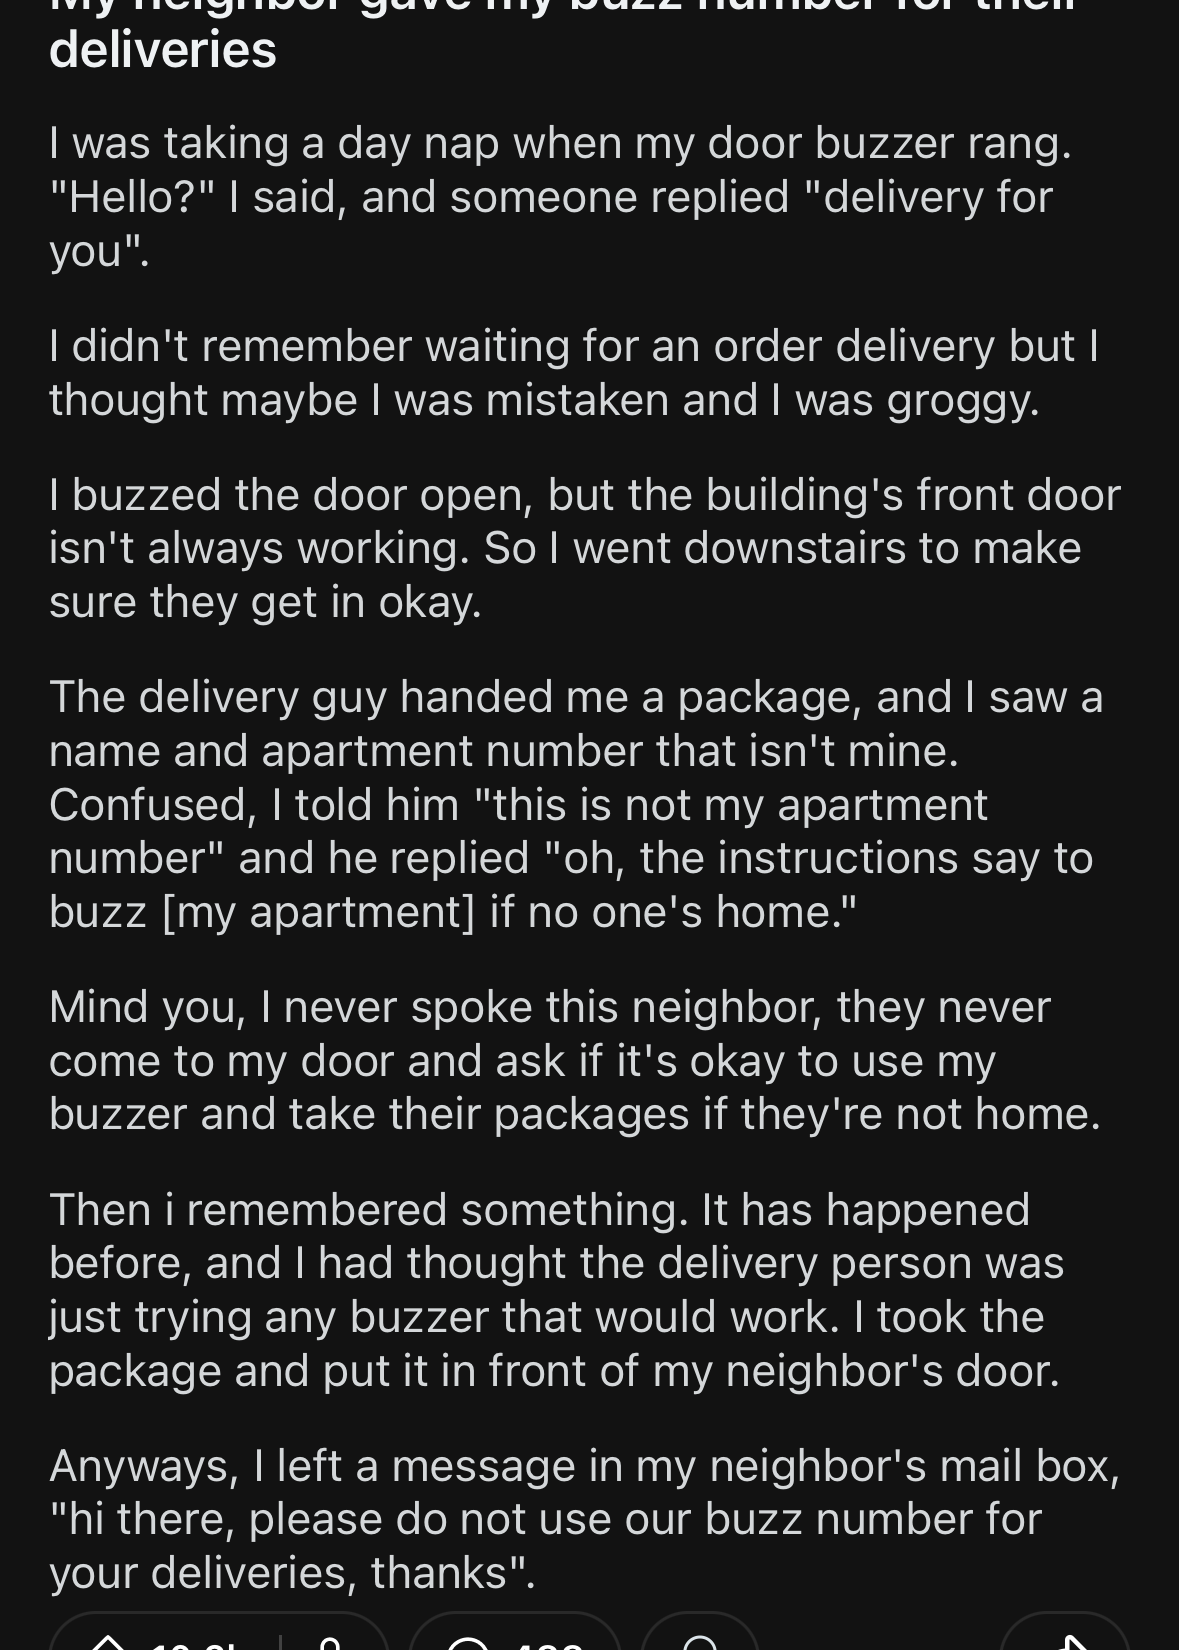 Reddit post by u/nerenthere12: User shares an infuriating story about their neighbor giving out their buzzer number for deliveries, resulting in confusion and inconvenience